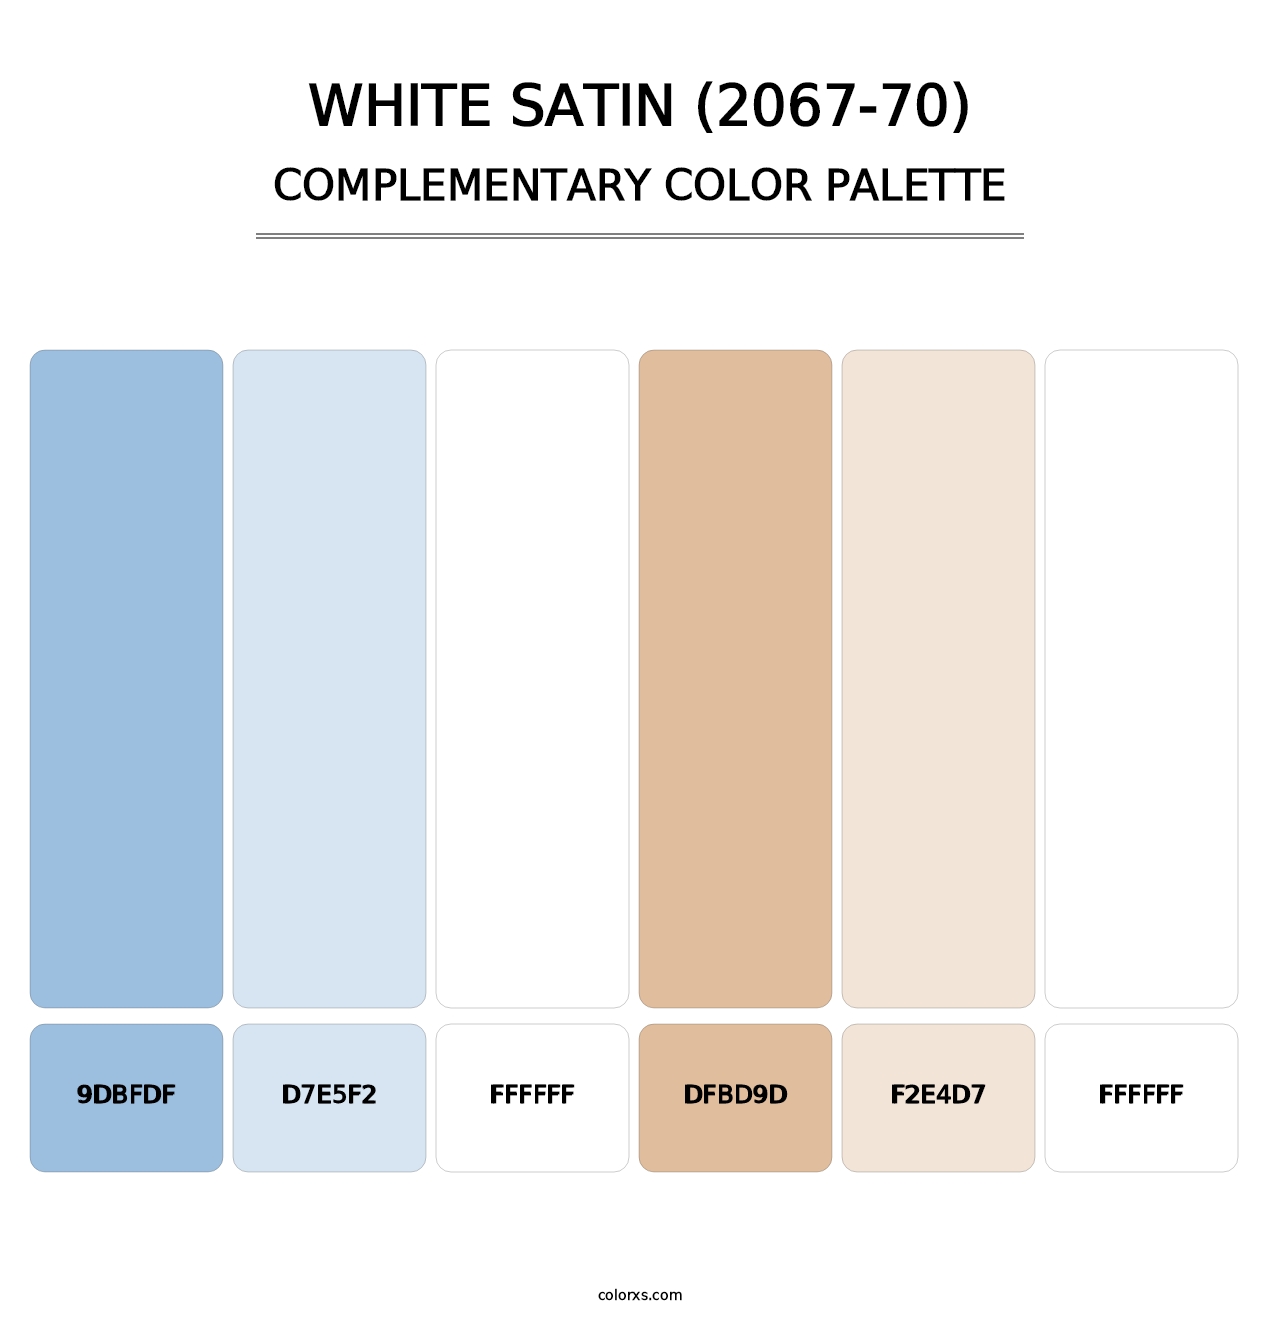 White Satin (2067-70) - Complementary Color Palette